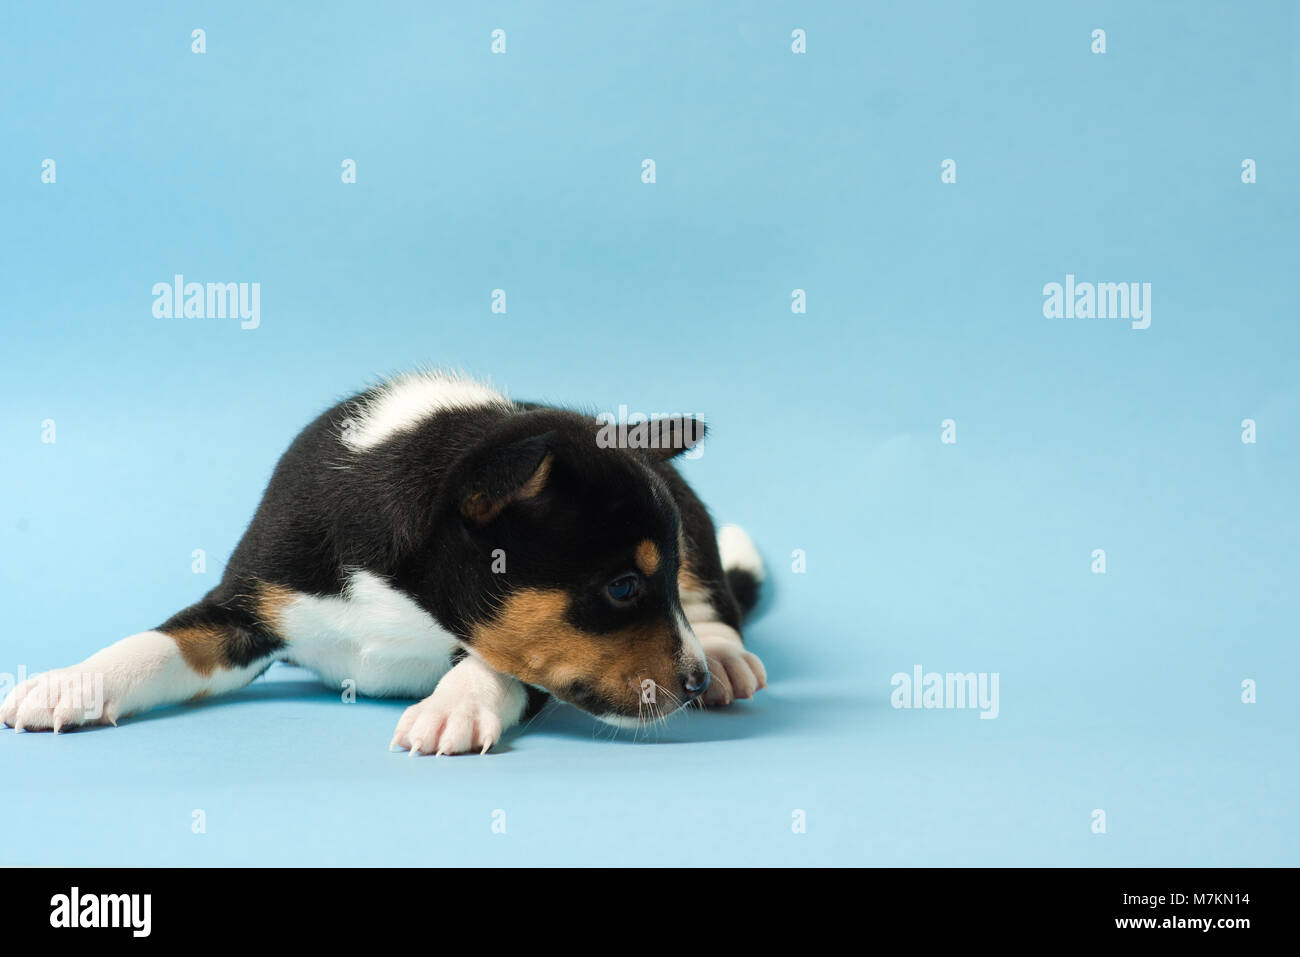 Studio photo of little dog at isolated blue background. Puppy looks away. Stock Photo